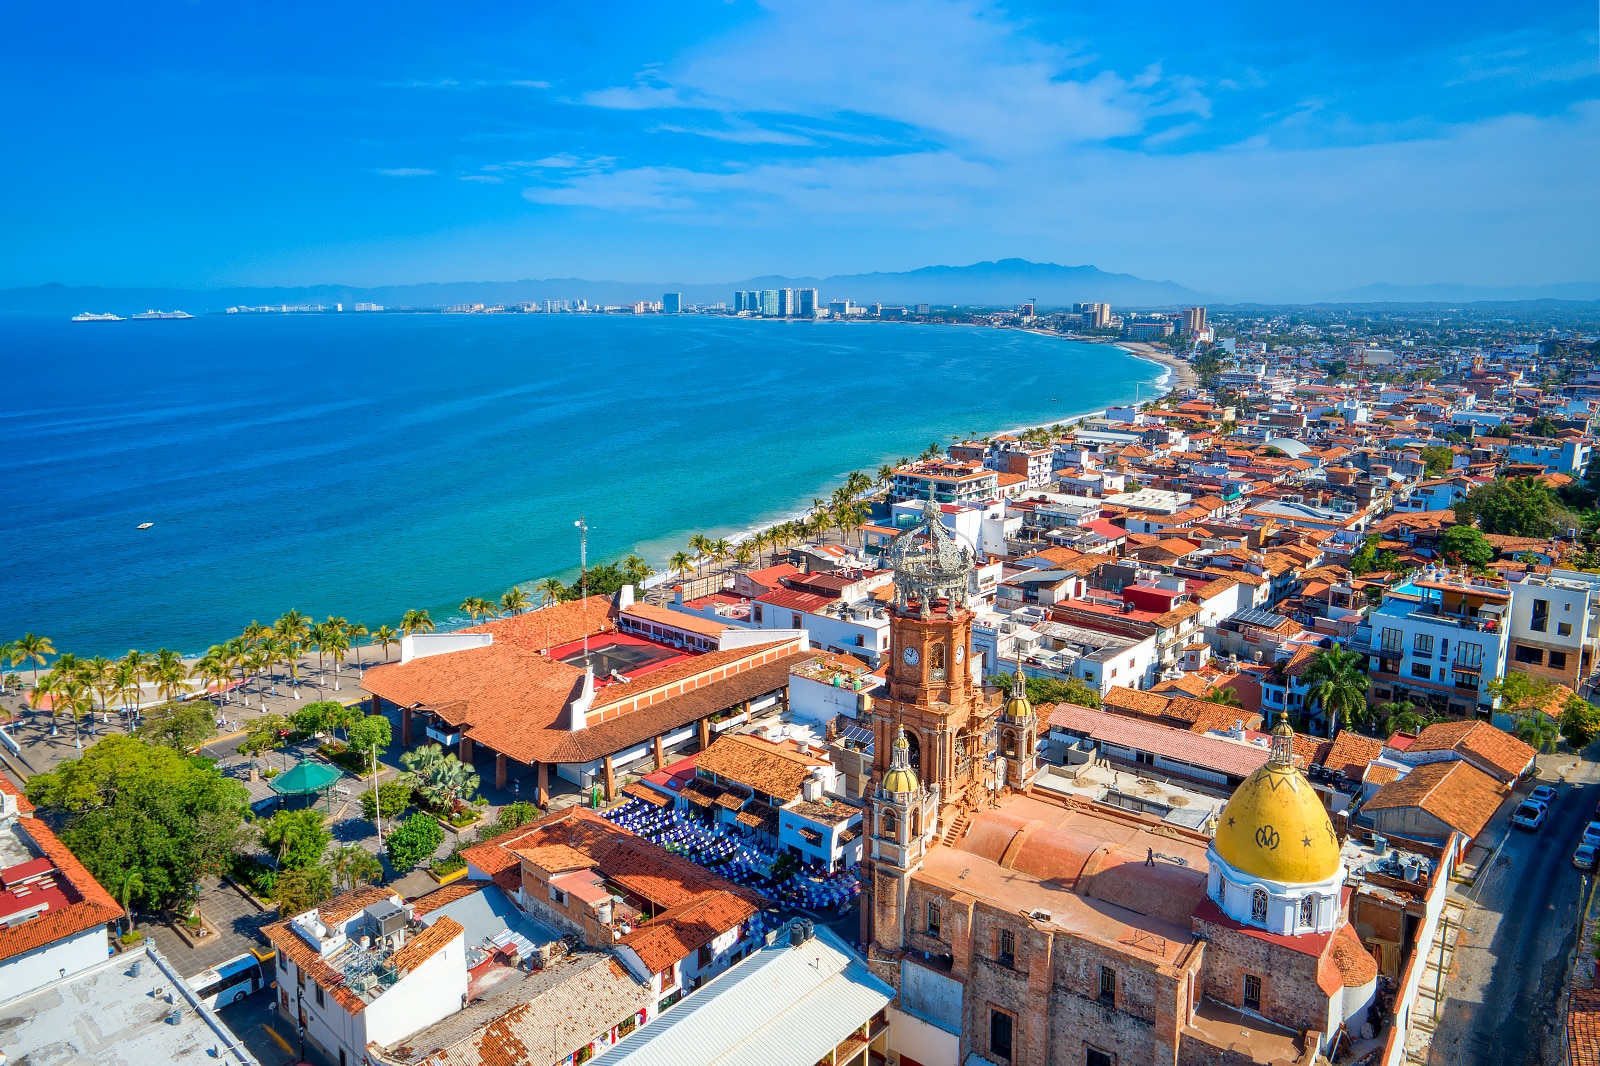 The iconic Church of Our Lady of Guadalupe with its striking architecture in the heart of Puerto Vallarta.